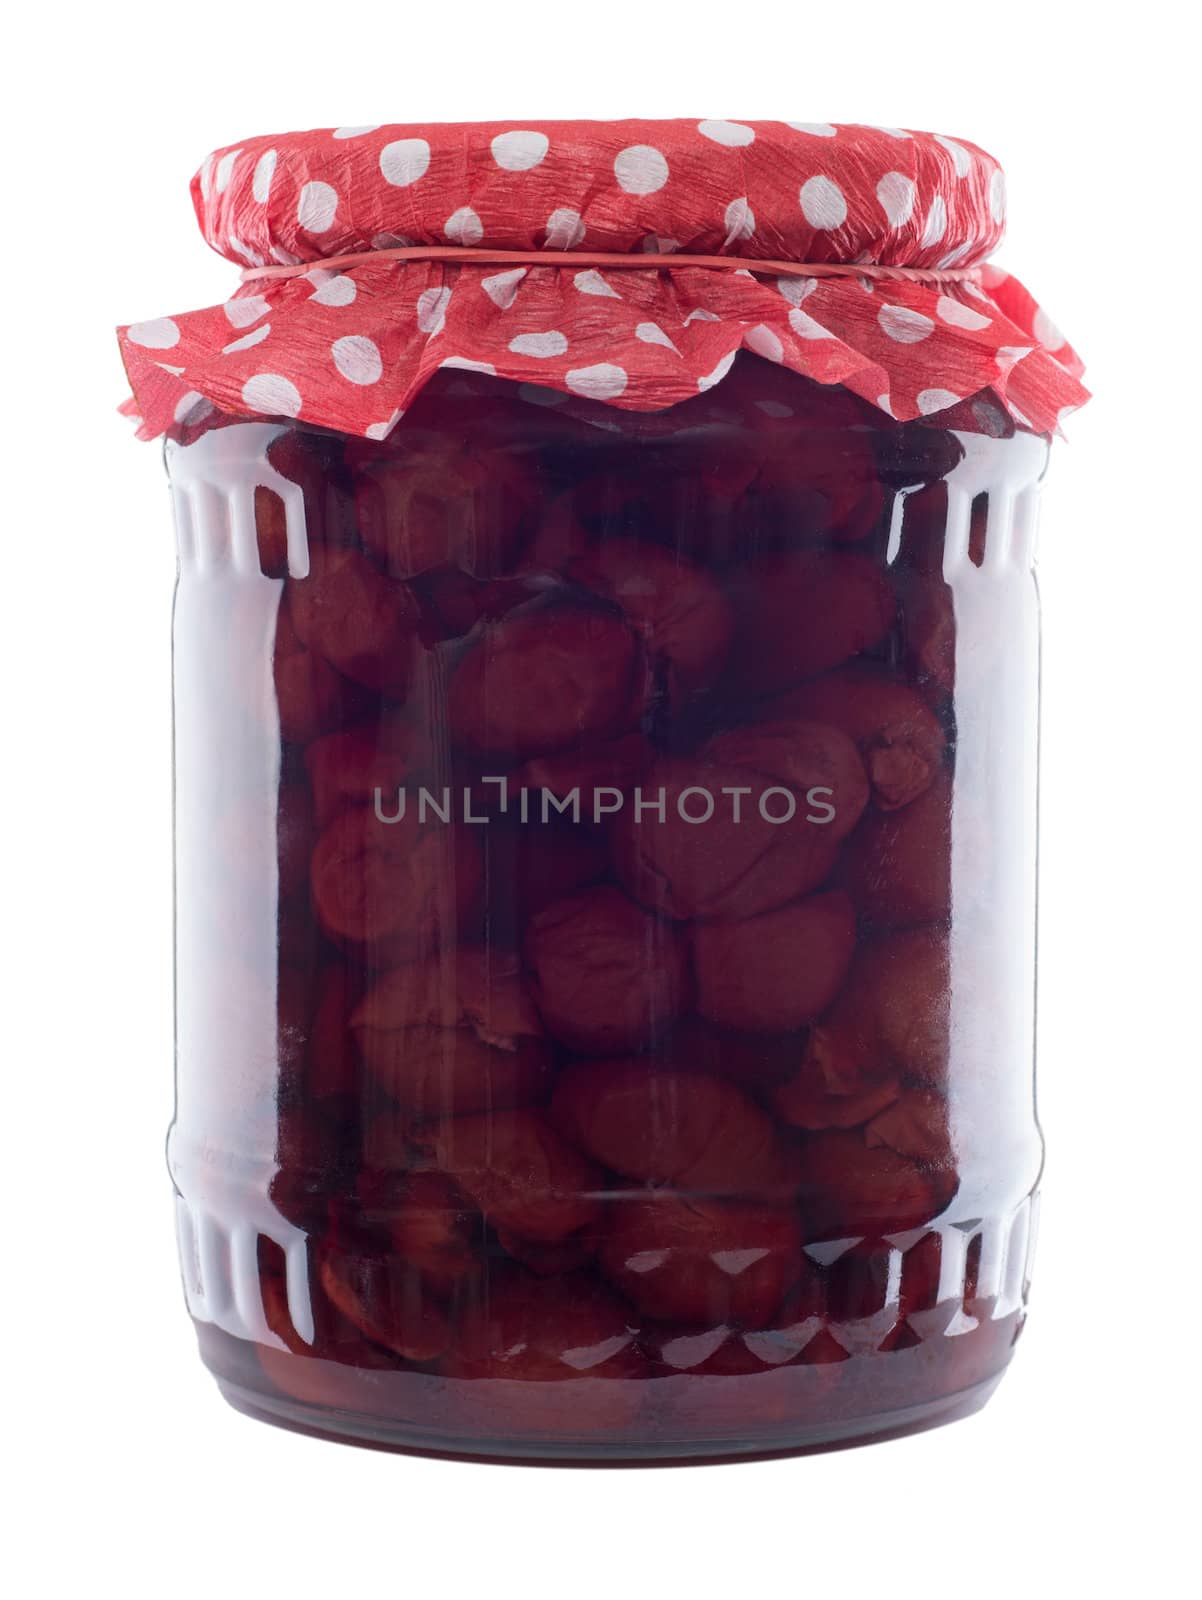 Jar of Canned Fruits by Rainman